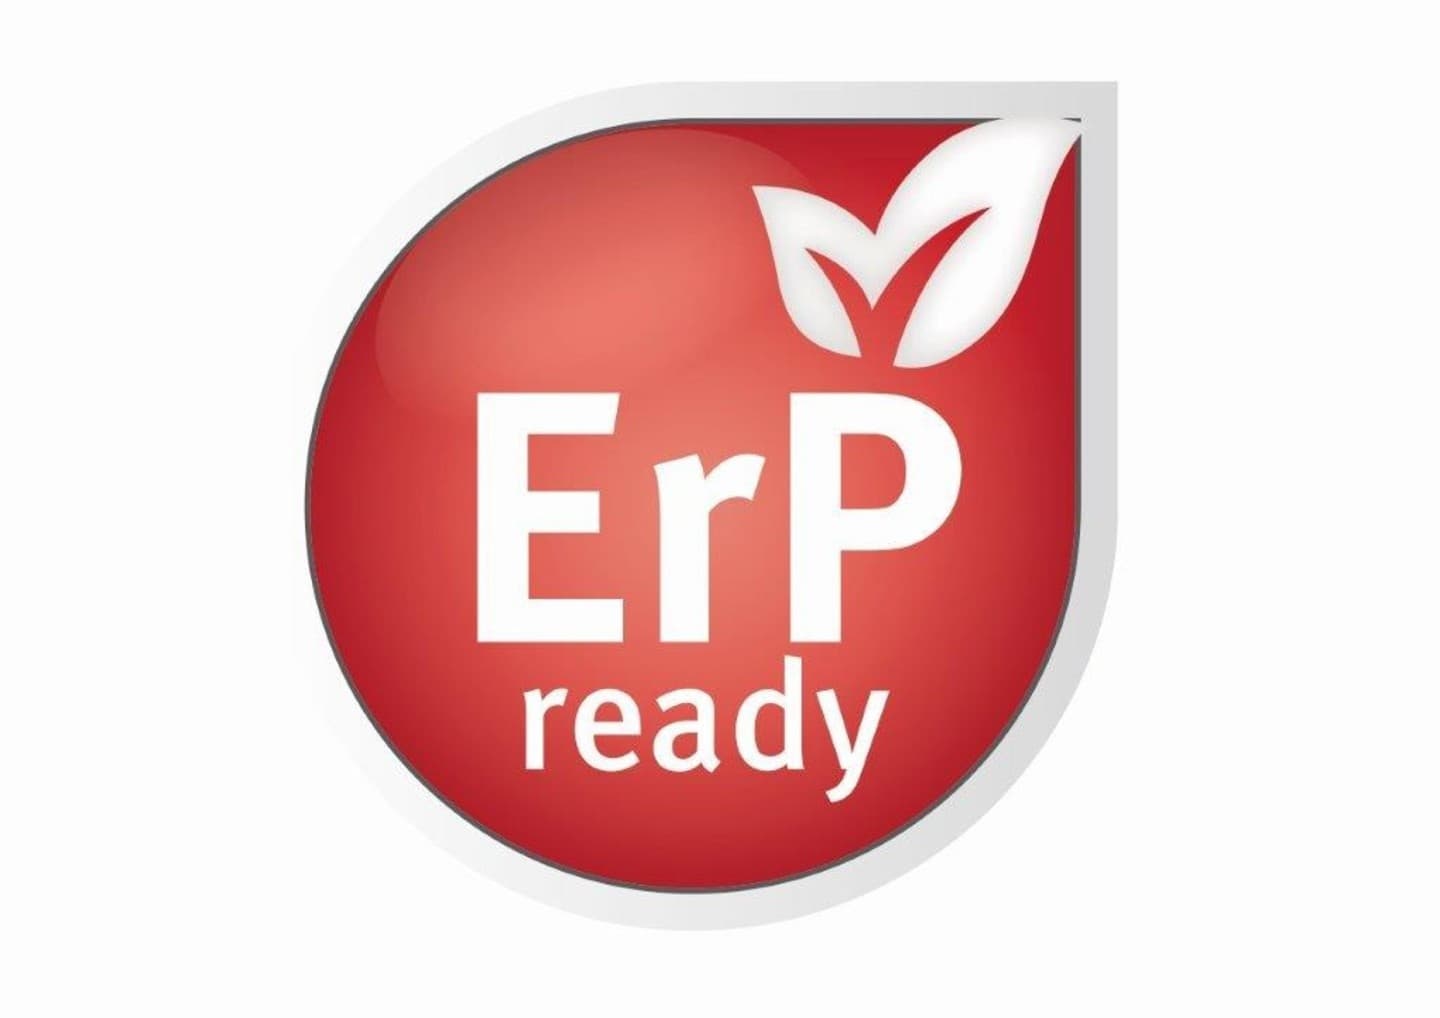 Placeholder for ERP ready label